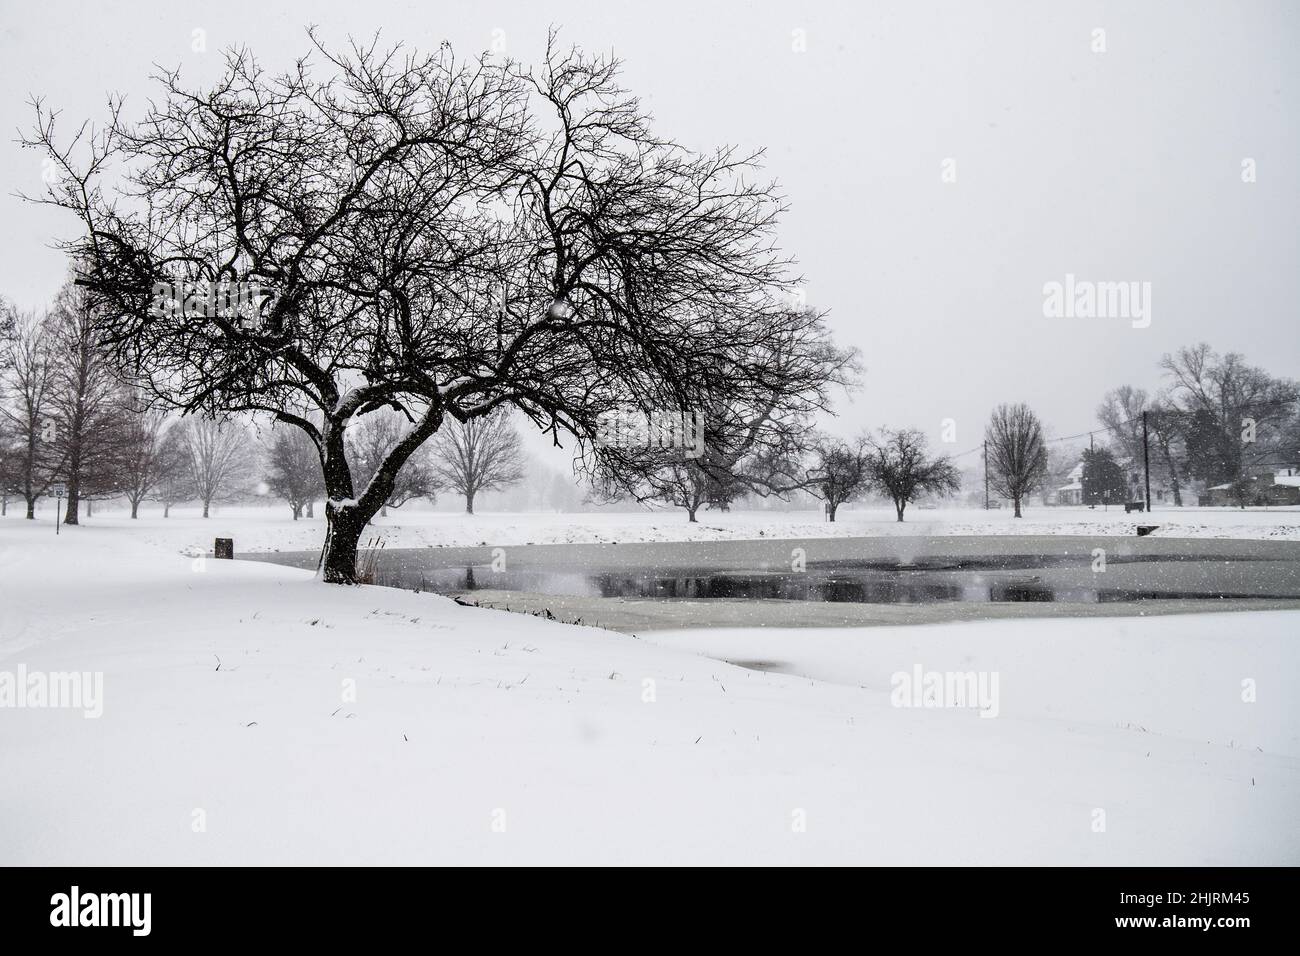 A lonely tree stands on the edge of a pond at the local city park. The ground is covered in snow and the pond has partially frozen over. Stock Photo